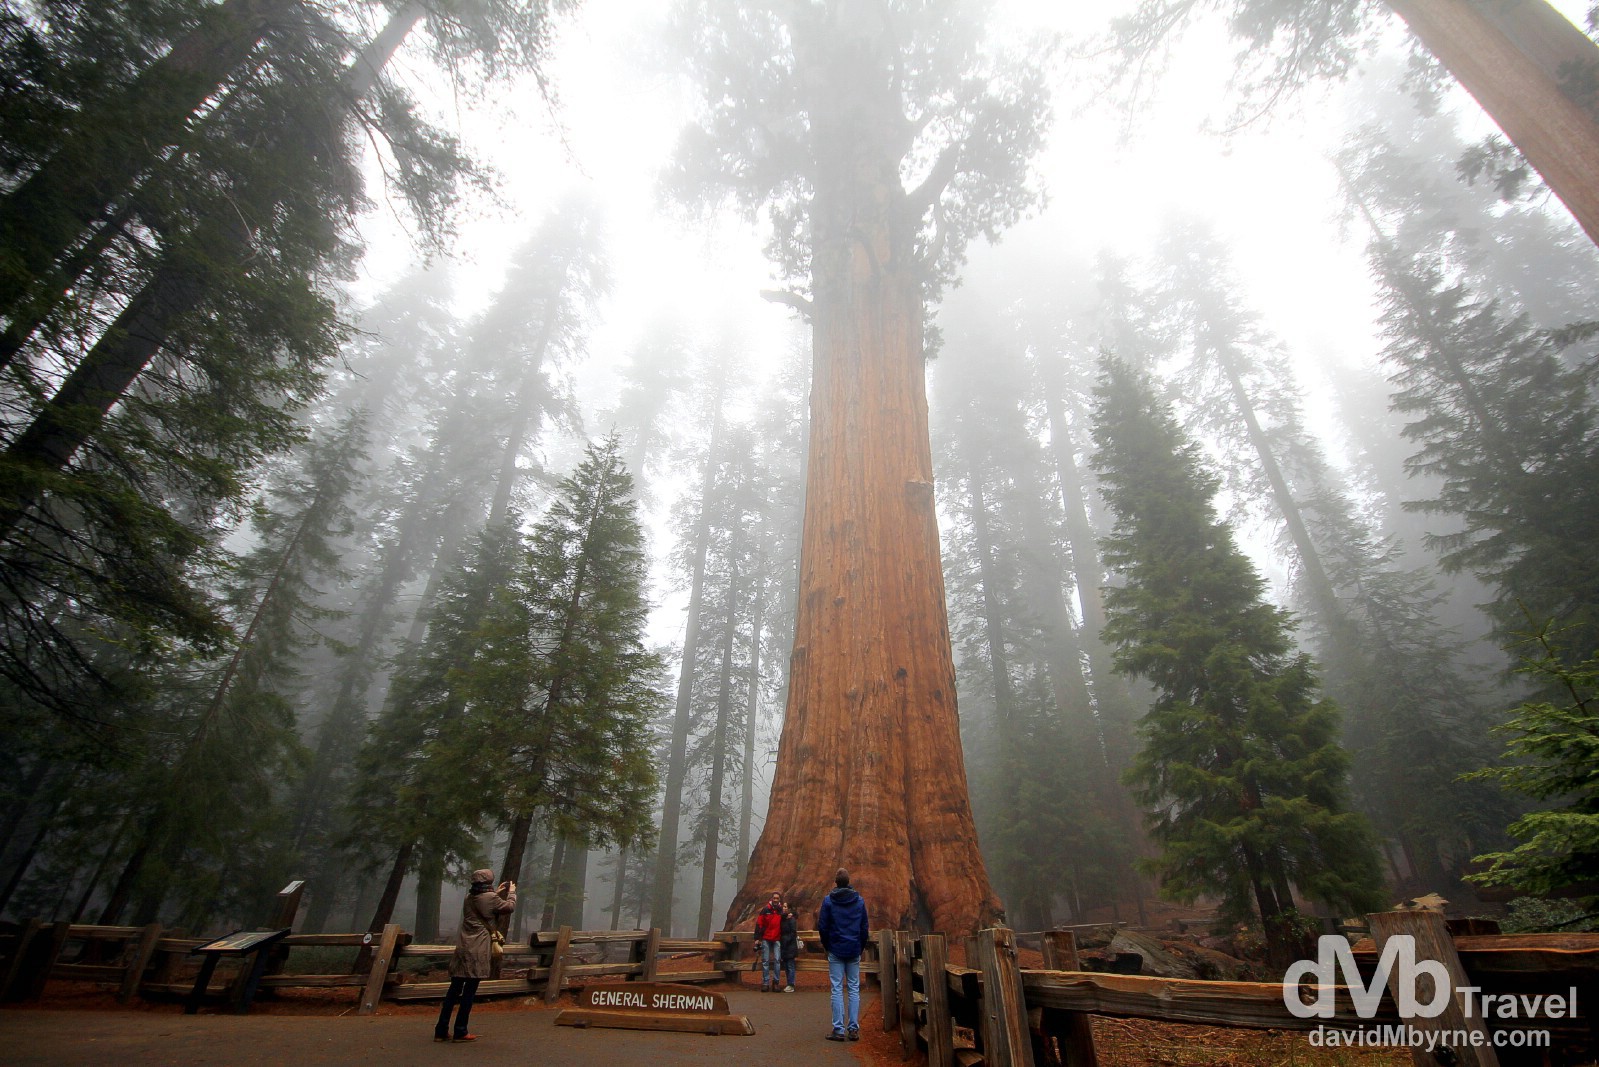 General Sherman, the largest tree on earth, in Sequoia National Park, California, USA. April 2nd 2013.